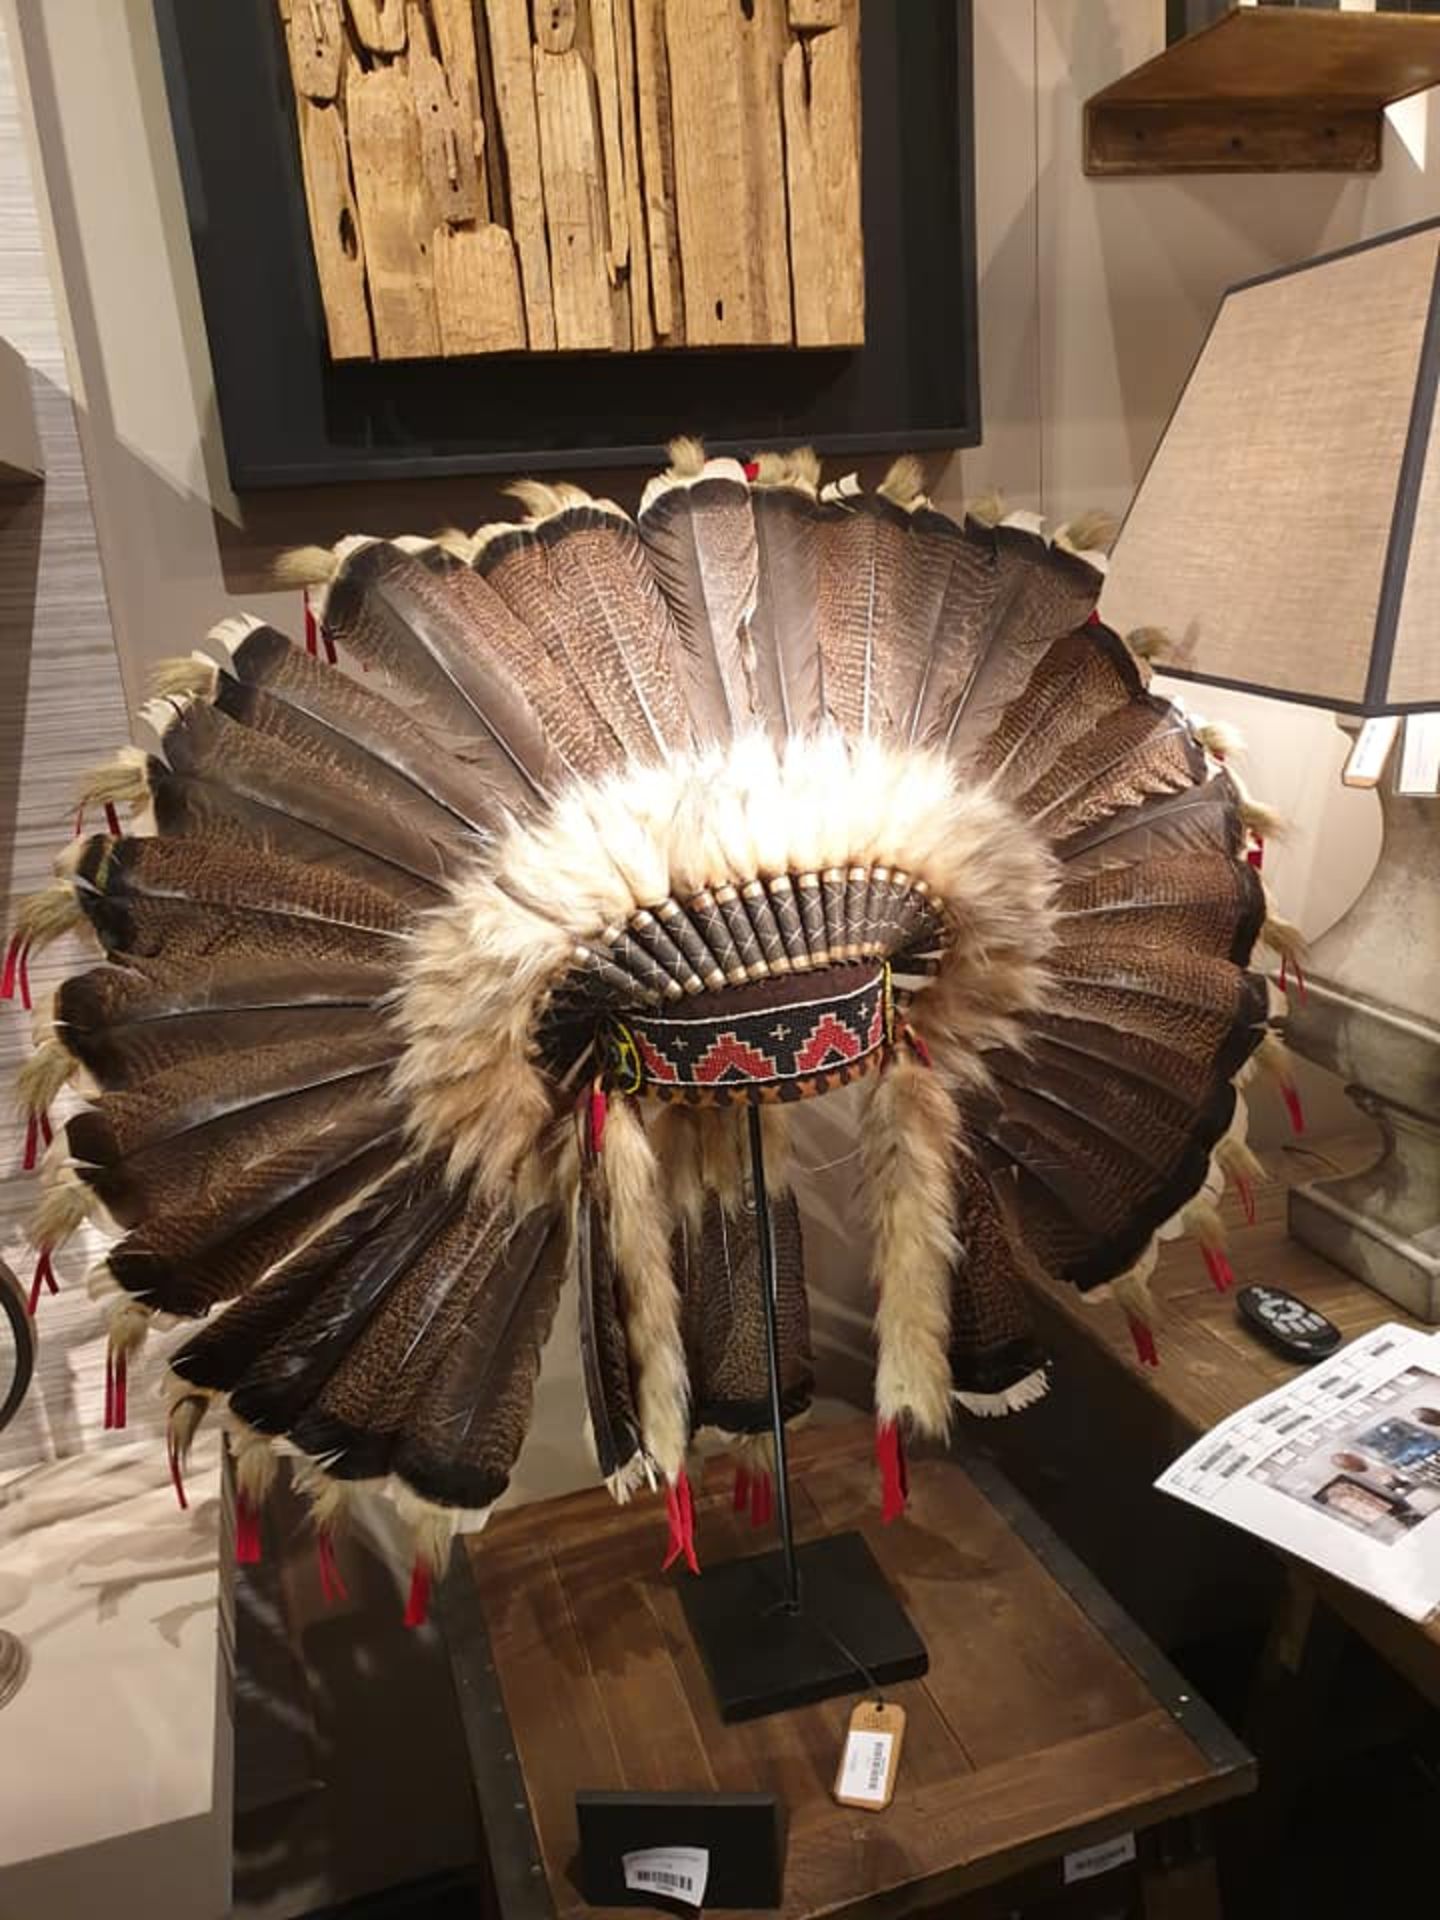 Sioux Indian Heardress Reproduction Of A Real Sioux War Chief's Headdress. Made With Real Turkey